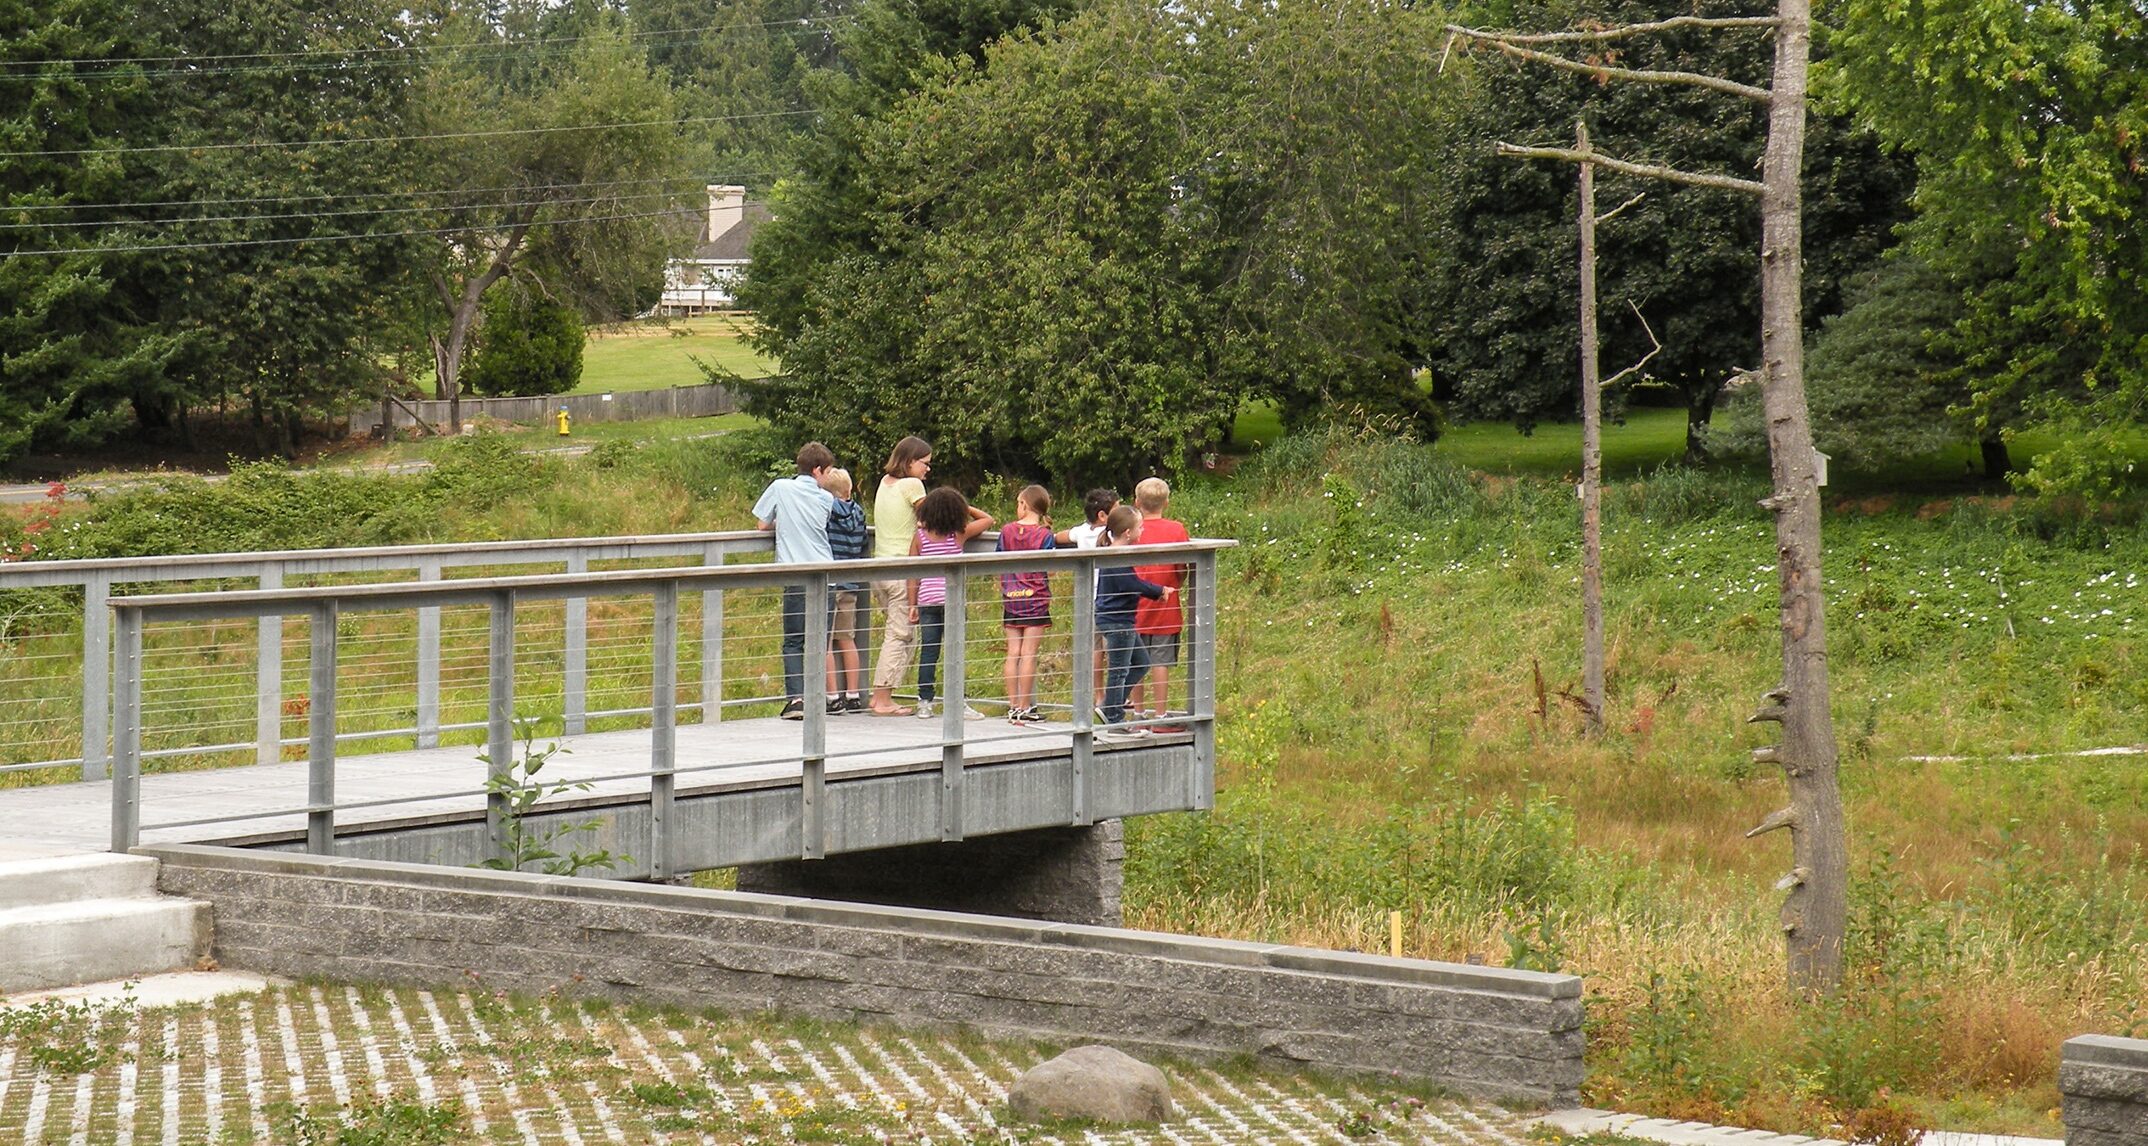 A preserved wetland claims a large portion of Riverview Elementary School’s site. Paths and observation areas create learning opportunities that engage students through exploration and play. - NAC